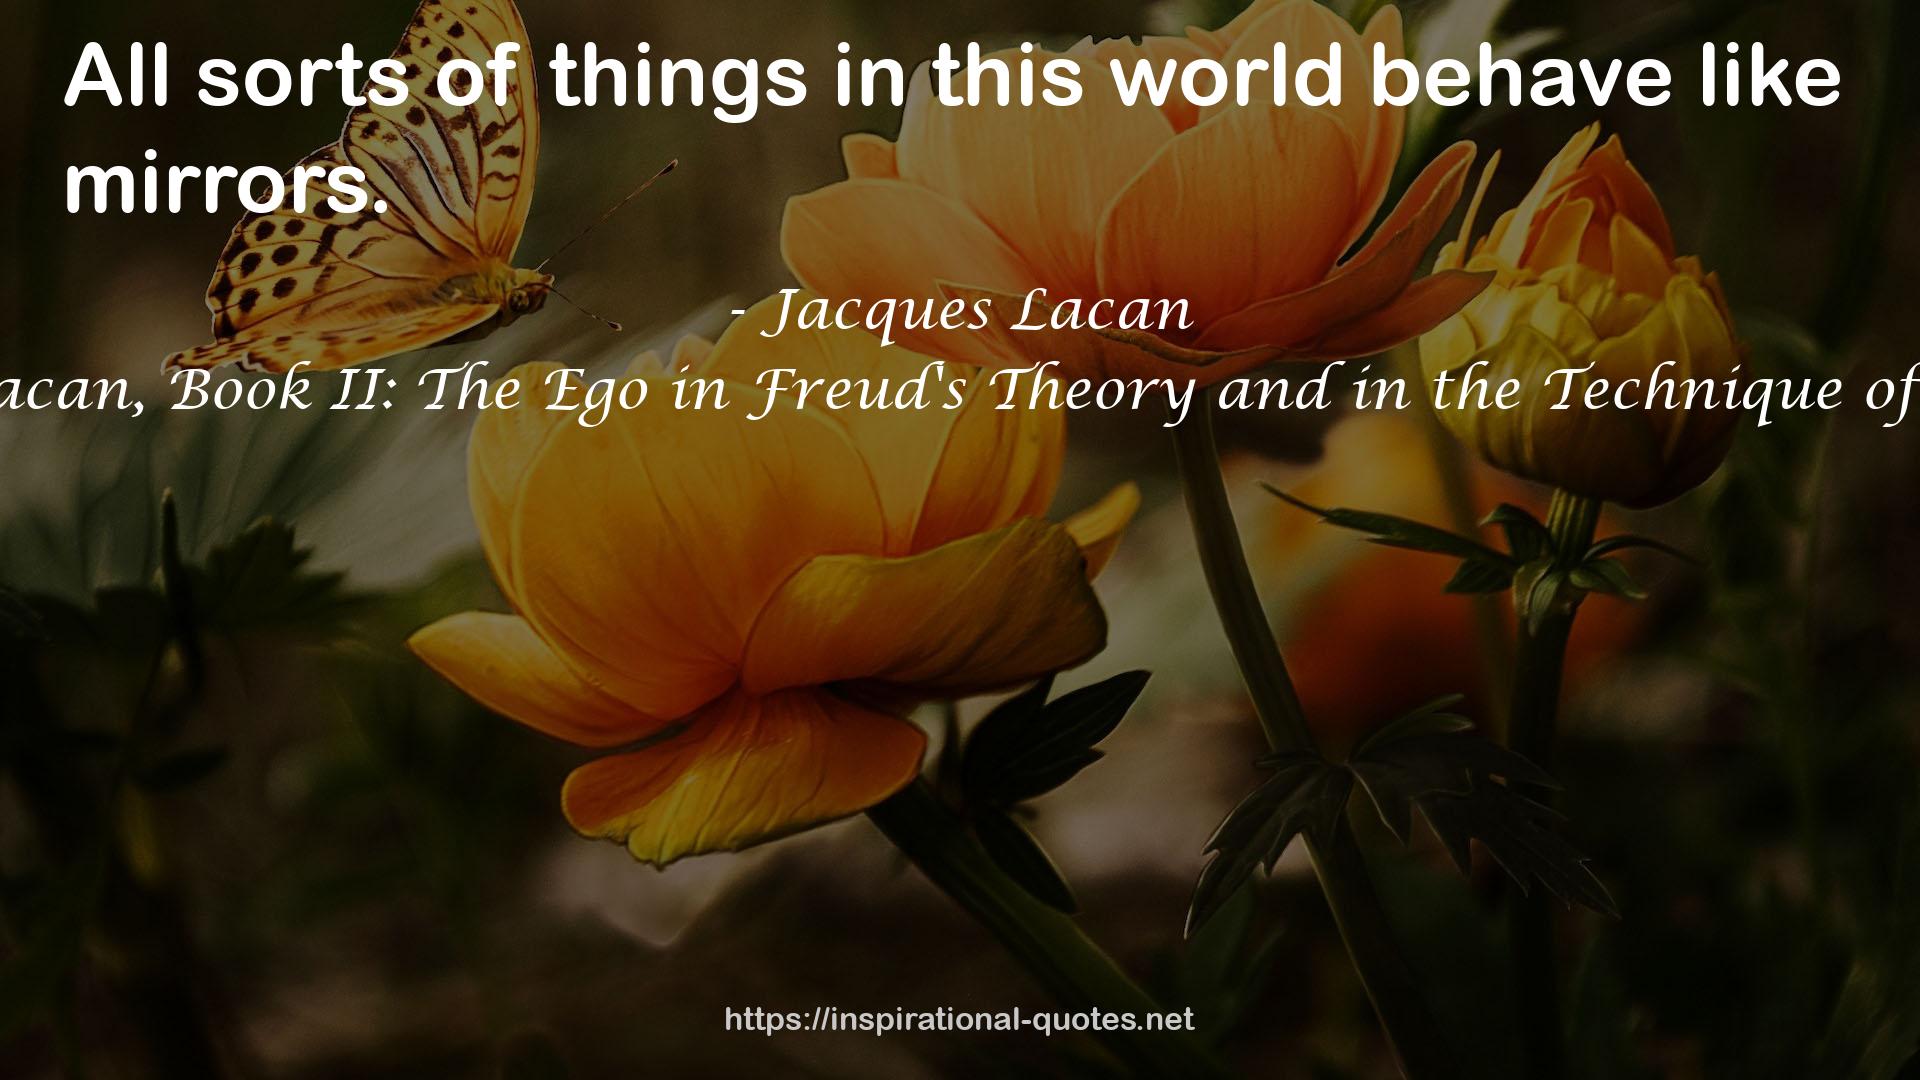 The Seminar of Jacques Lacan, Book II: The Ego in Freud's Theory and in the Technique of Psychoanalysis, 1954-1955 QUOTES